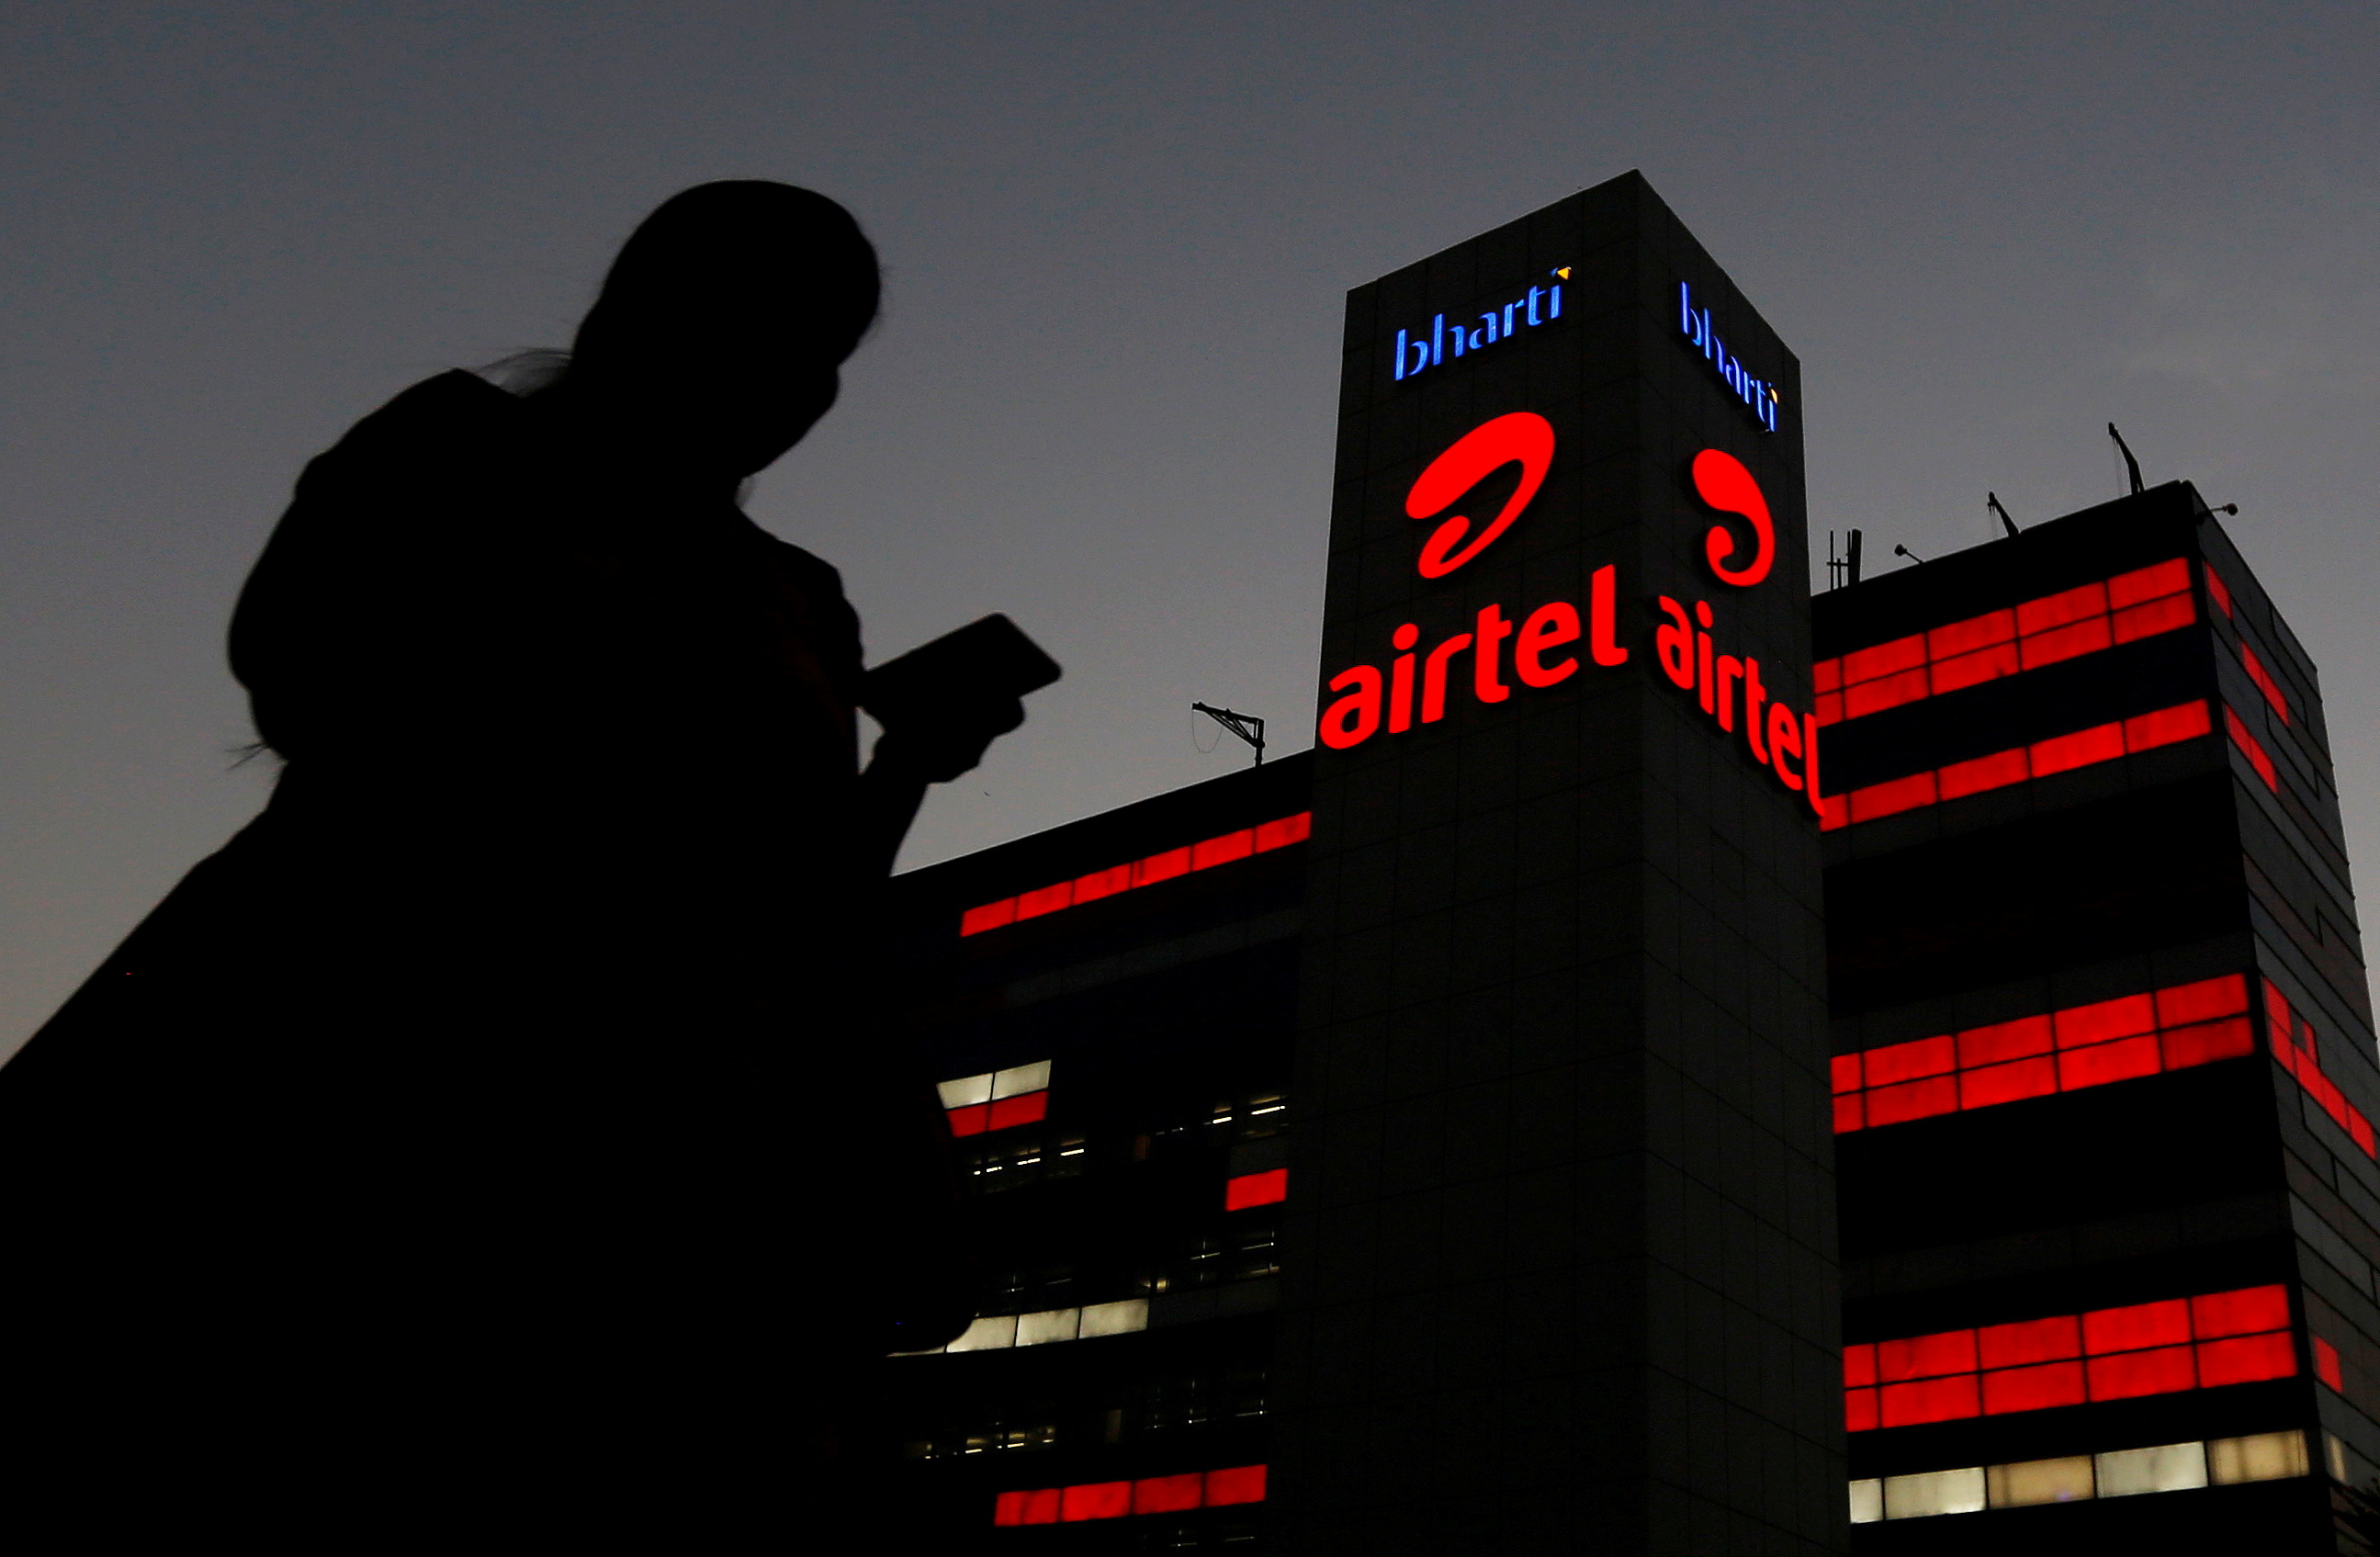 A girl checks her mobile phone as she walks past the Bharti Airtel office building in Gurugram